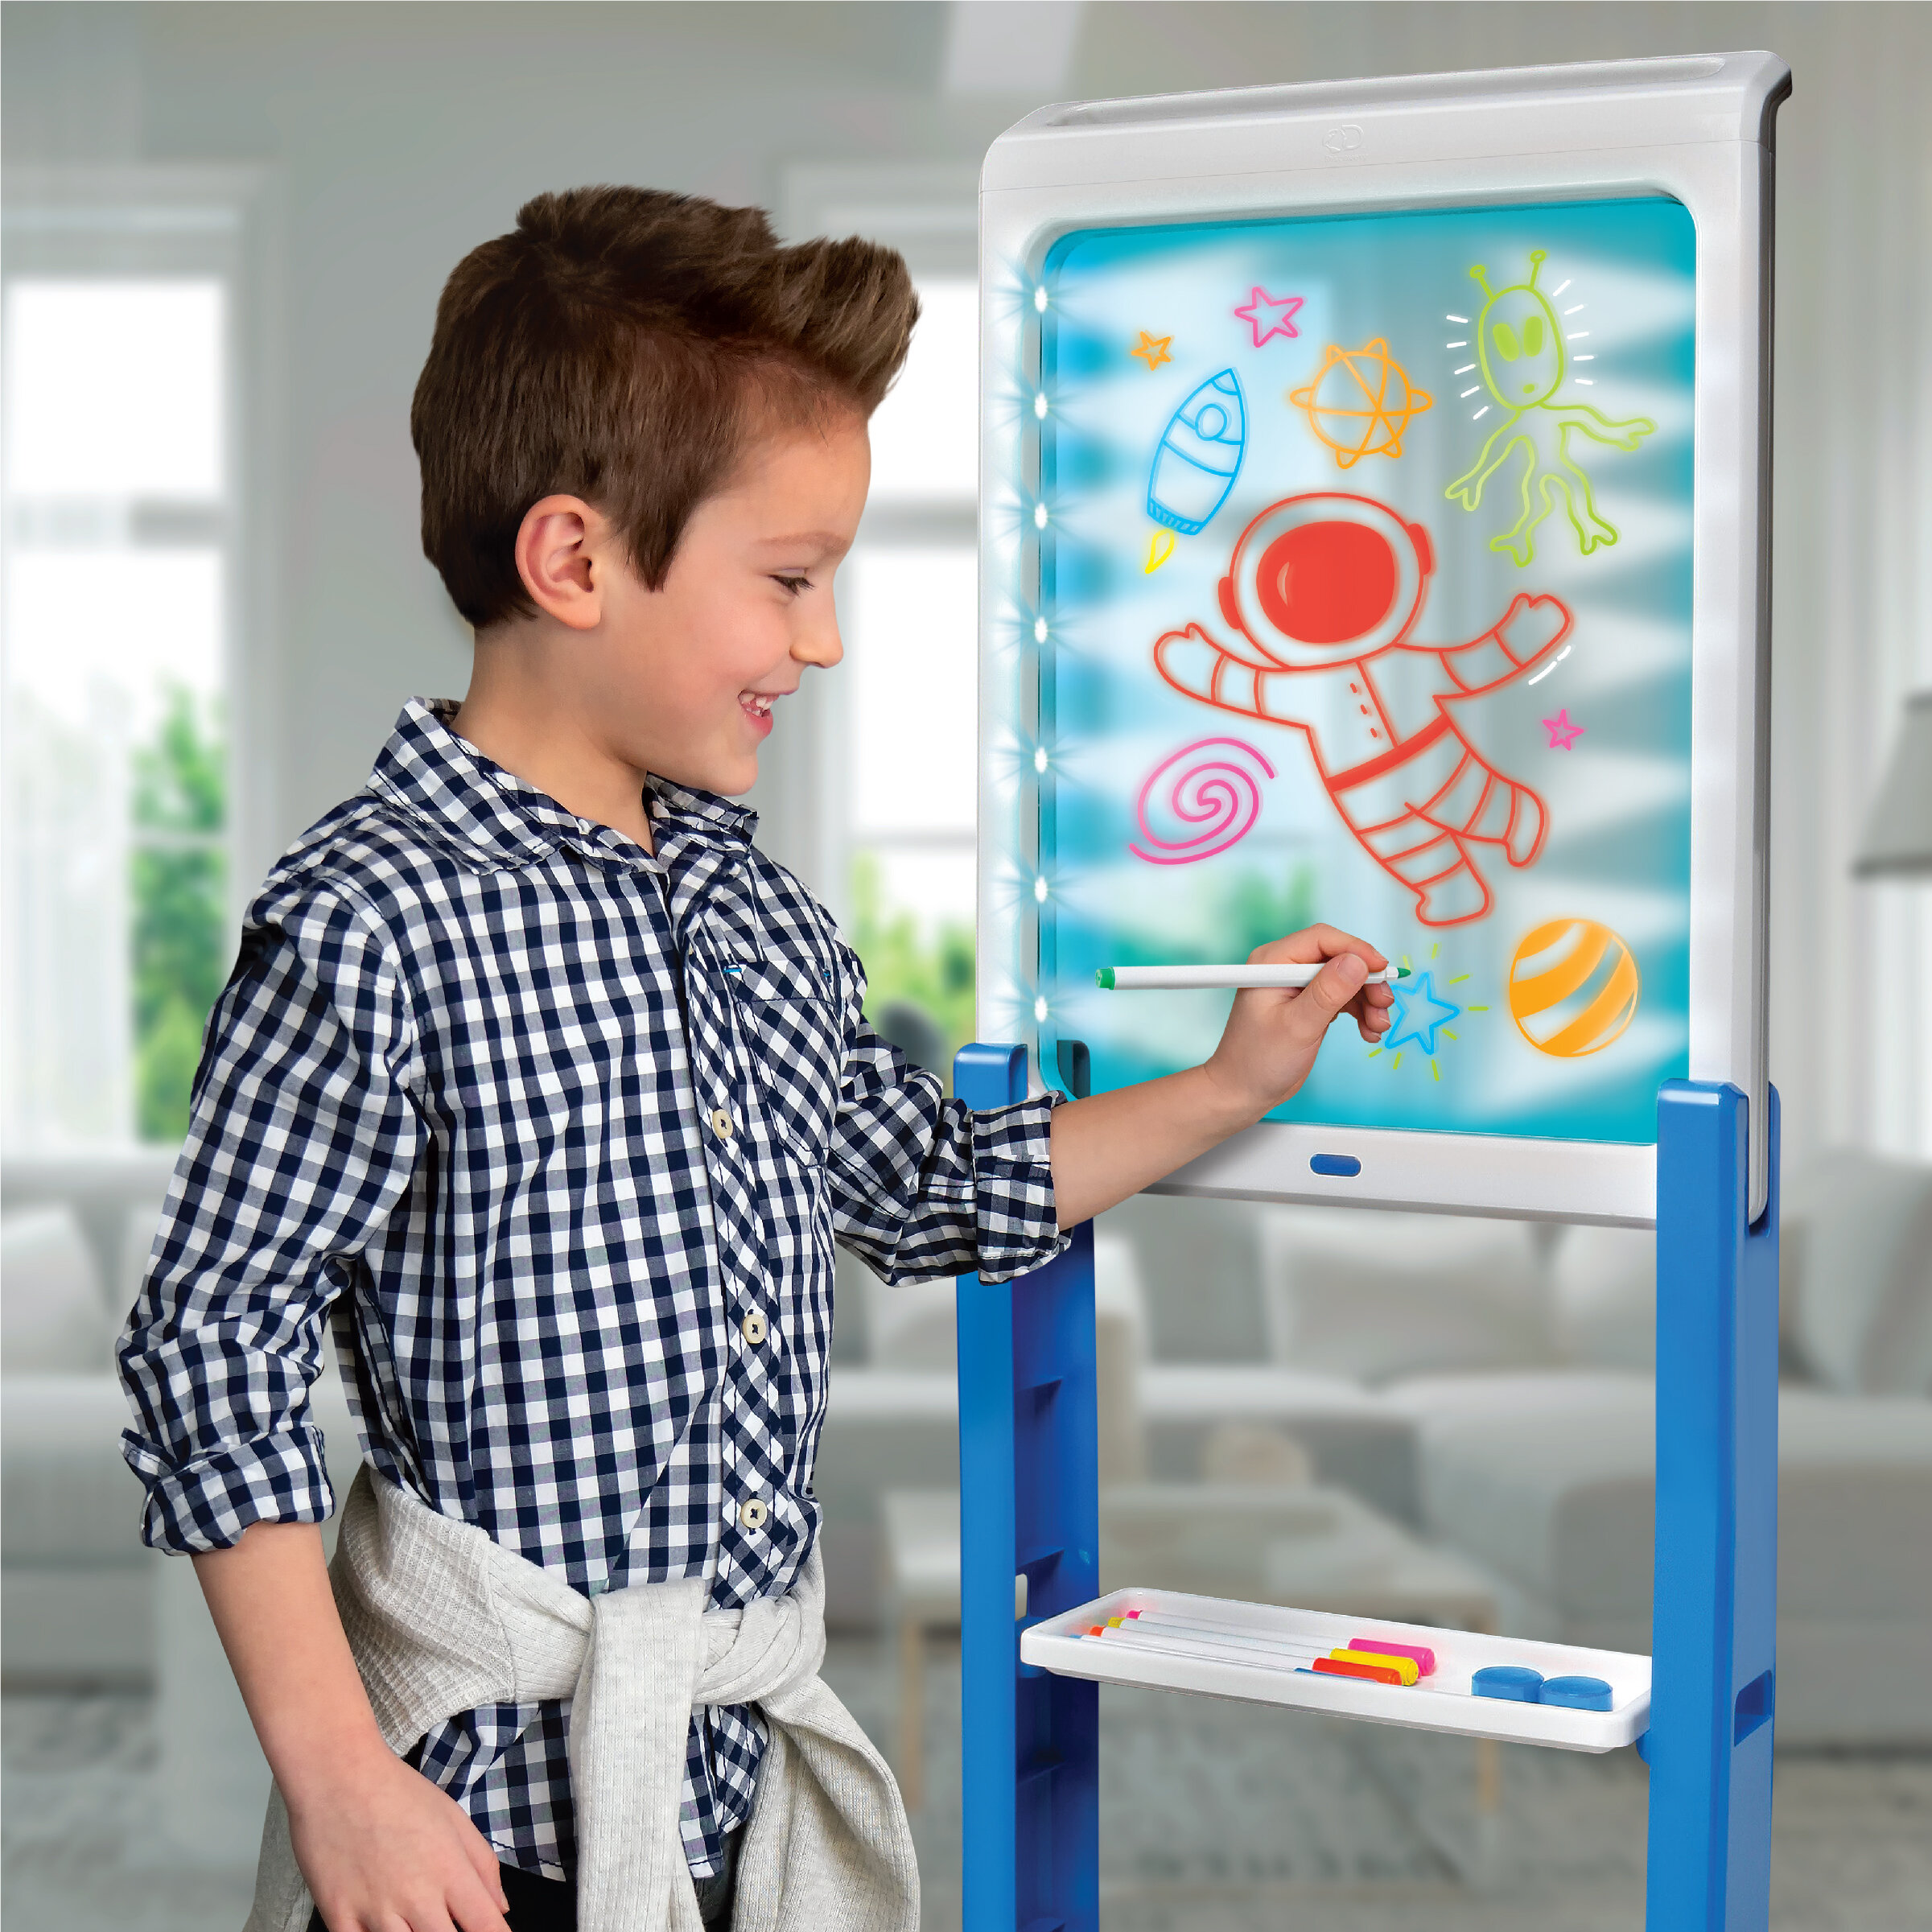 HOMCOM 2-In-1 Kids Table and Chair Set Drawing Board Age 1-3